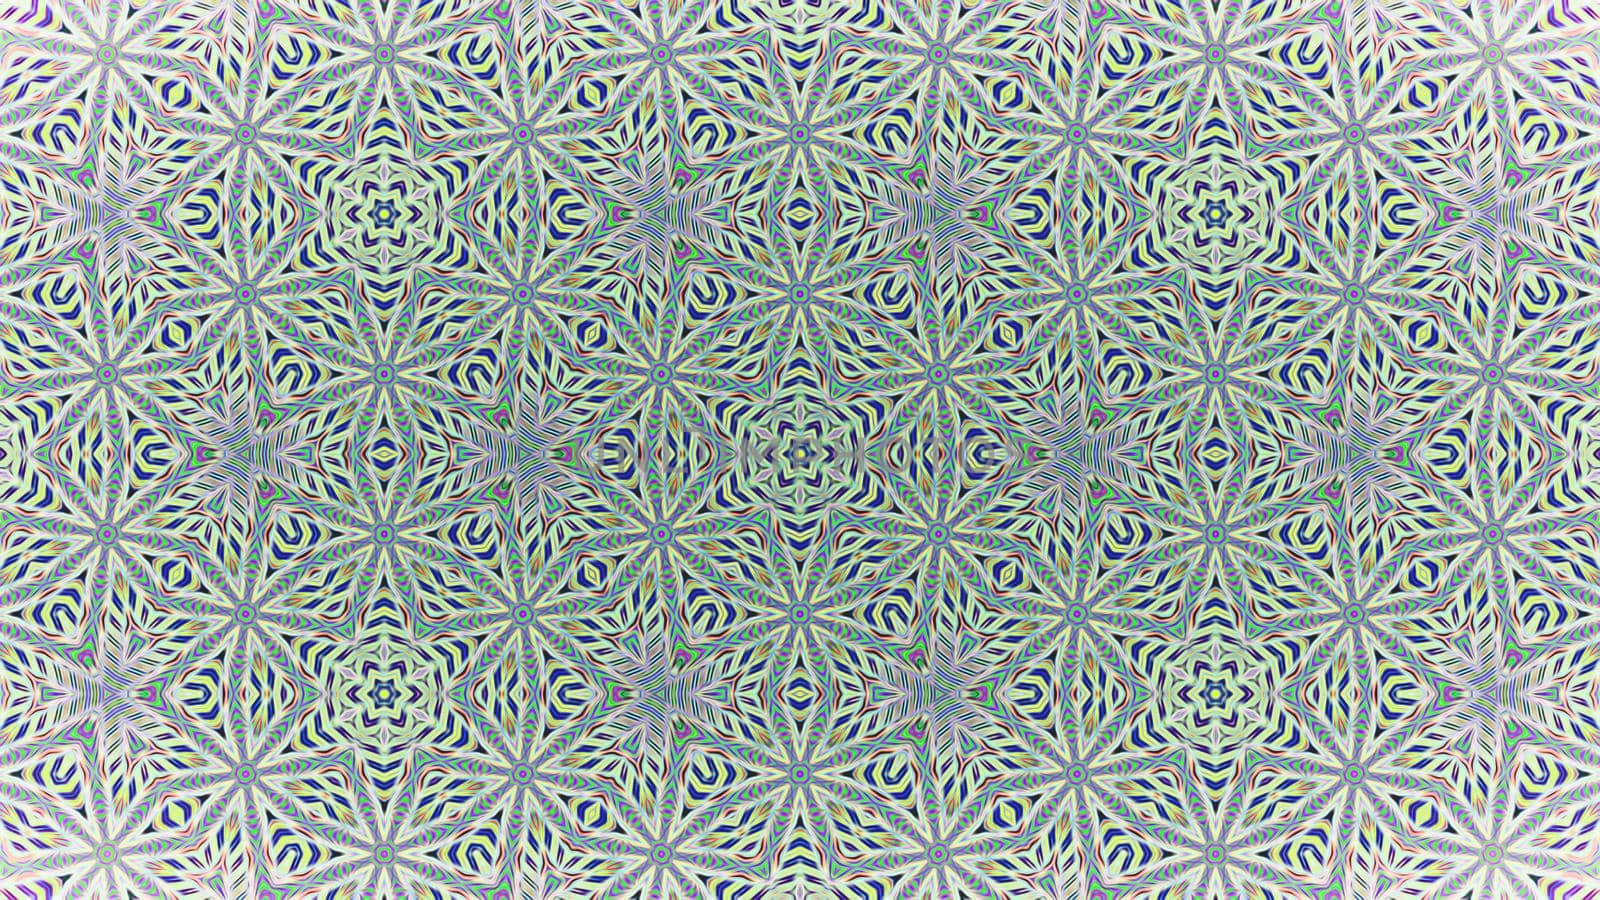 Abstract kaleidoscope background with a symmetrical pattern by Vvicca